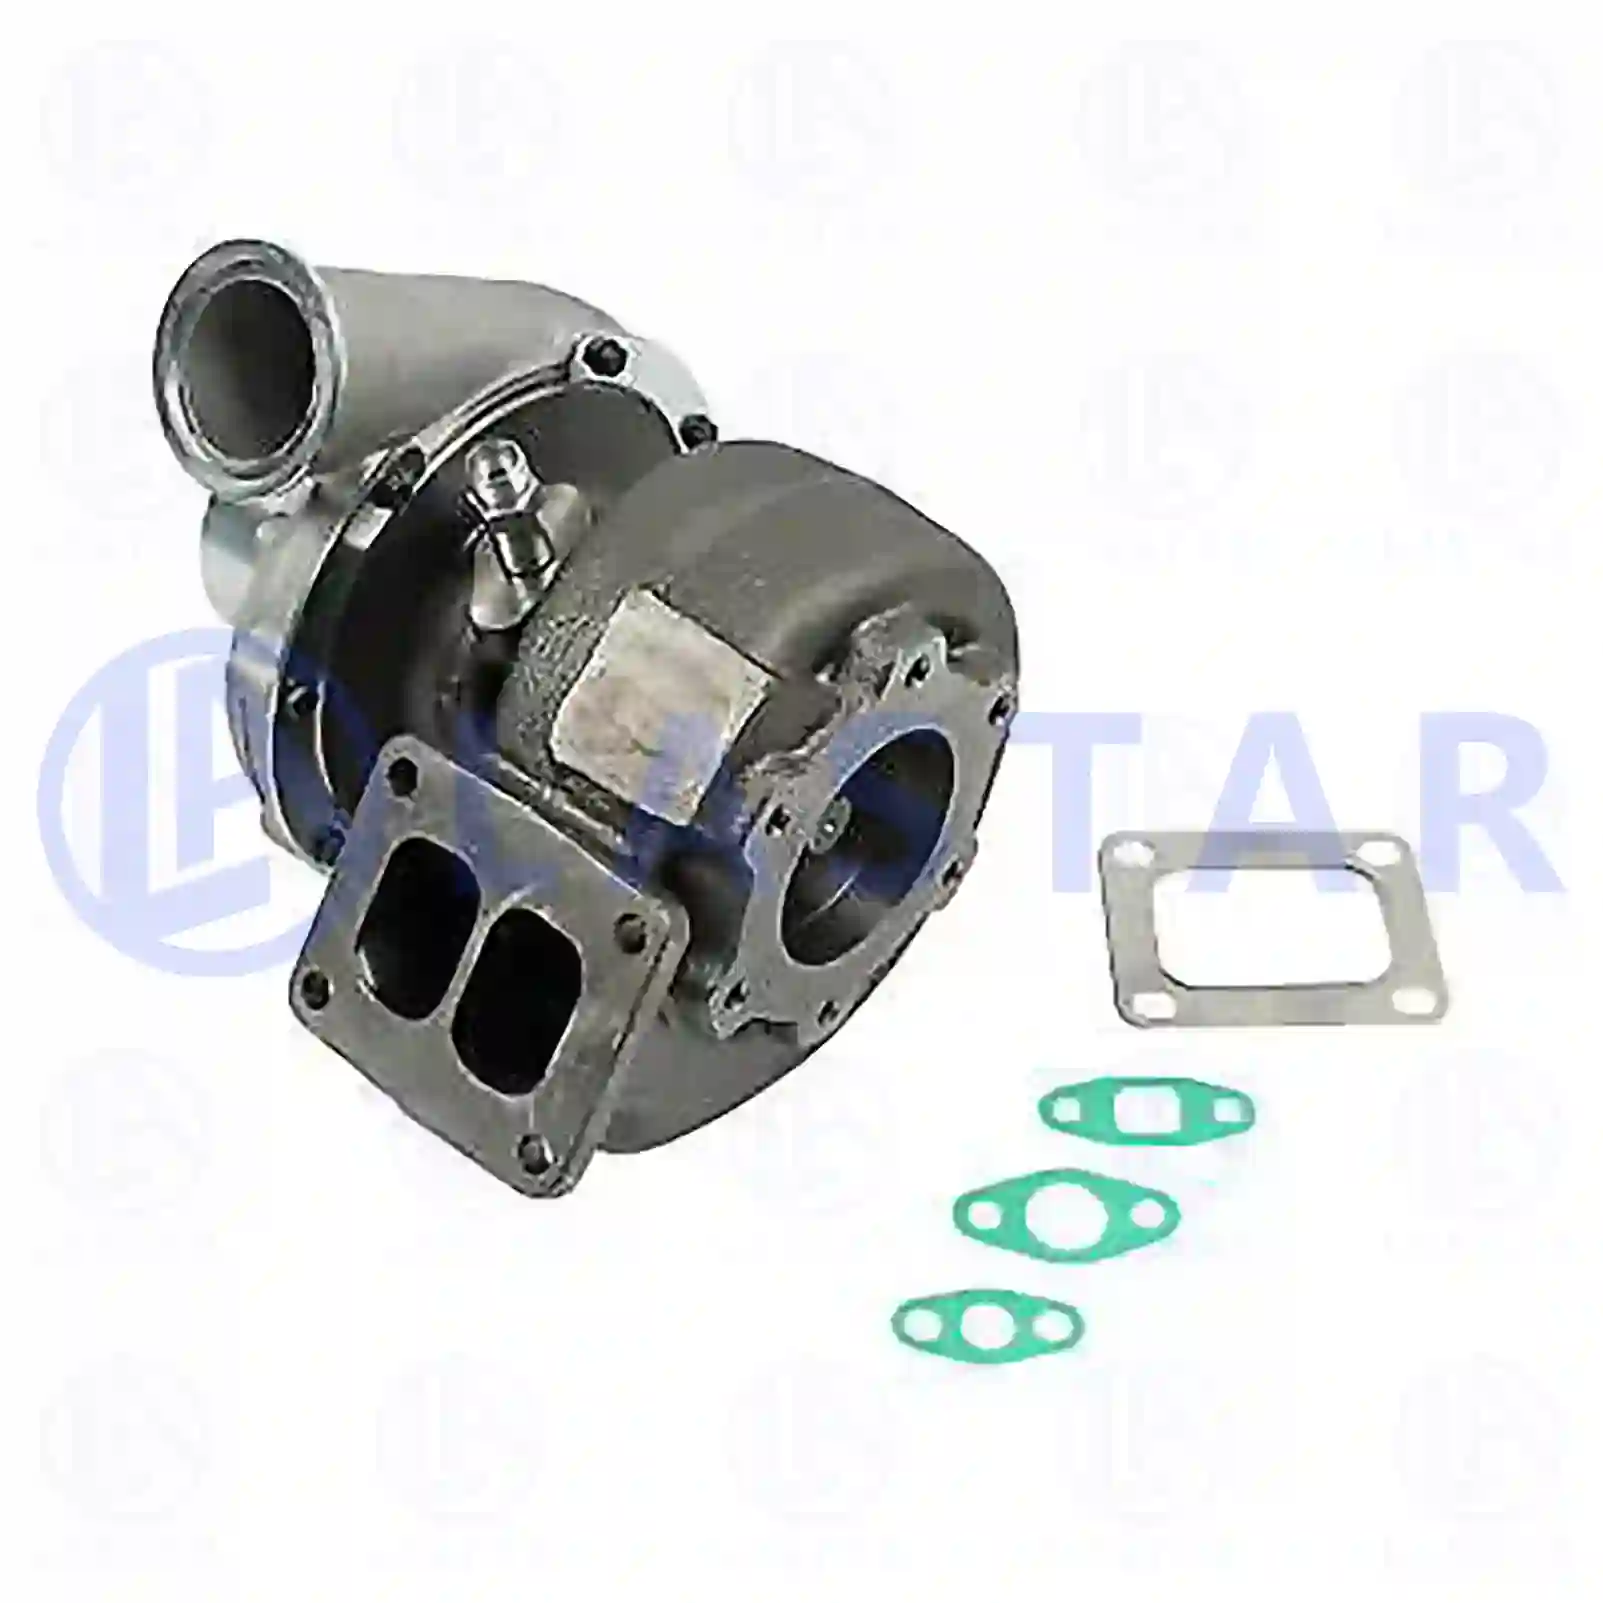 Turbocharger, with gasket kit, 77700375, 51091007418, 51091007441, 51091007442, 51091007443, 51091007459, 51091007460, 51091007481, 51091007520, 51091007549, 51091007785, 51091007786, 51091009441, 51091009442, 51091009443, 51091009460, 51091009481, 51091009520, 51091009549, 51091009785, 51091009786, 51091007786 ||  77700375 Lastar Spare Part | Truck Spare Parts, Auotomotive Spare Parts Turbocharger, with gasket kit, 77700375, 51091007418, 51091007441, 51091007442, 51091007443, 51091007459, 51091007460, 51091007481, 51091007520, 51091007549, 51091007785, 51091007786, 51091009441, 51091009442, 51091009443, 51091009460, 51091009481, 51091009520, 51091009549, 51091009785, 51091009786, 51091007786 ||  77700375 Lastar Spare Part | Truck Spare Parts, Auotomotive Spare Parts